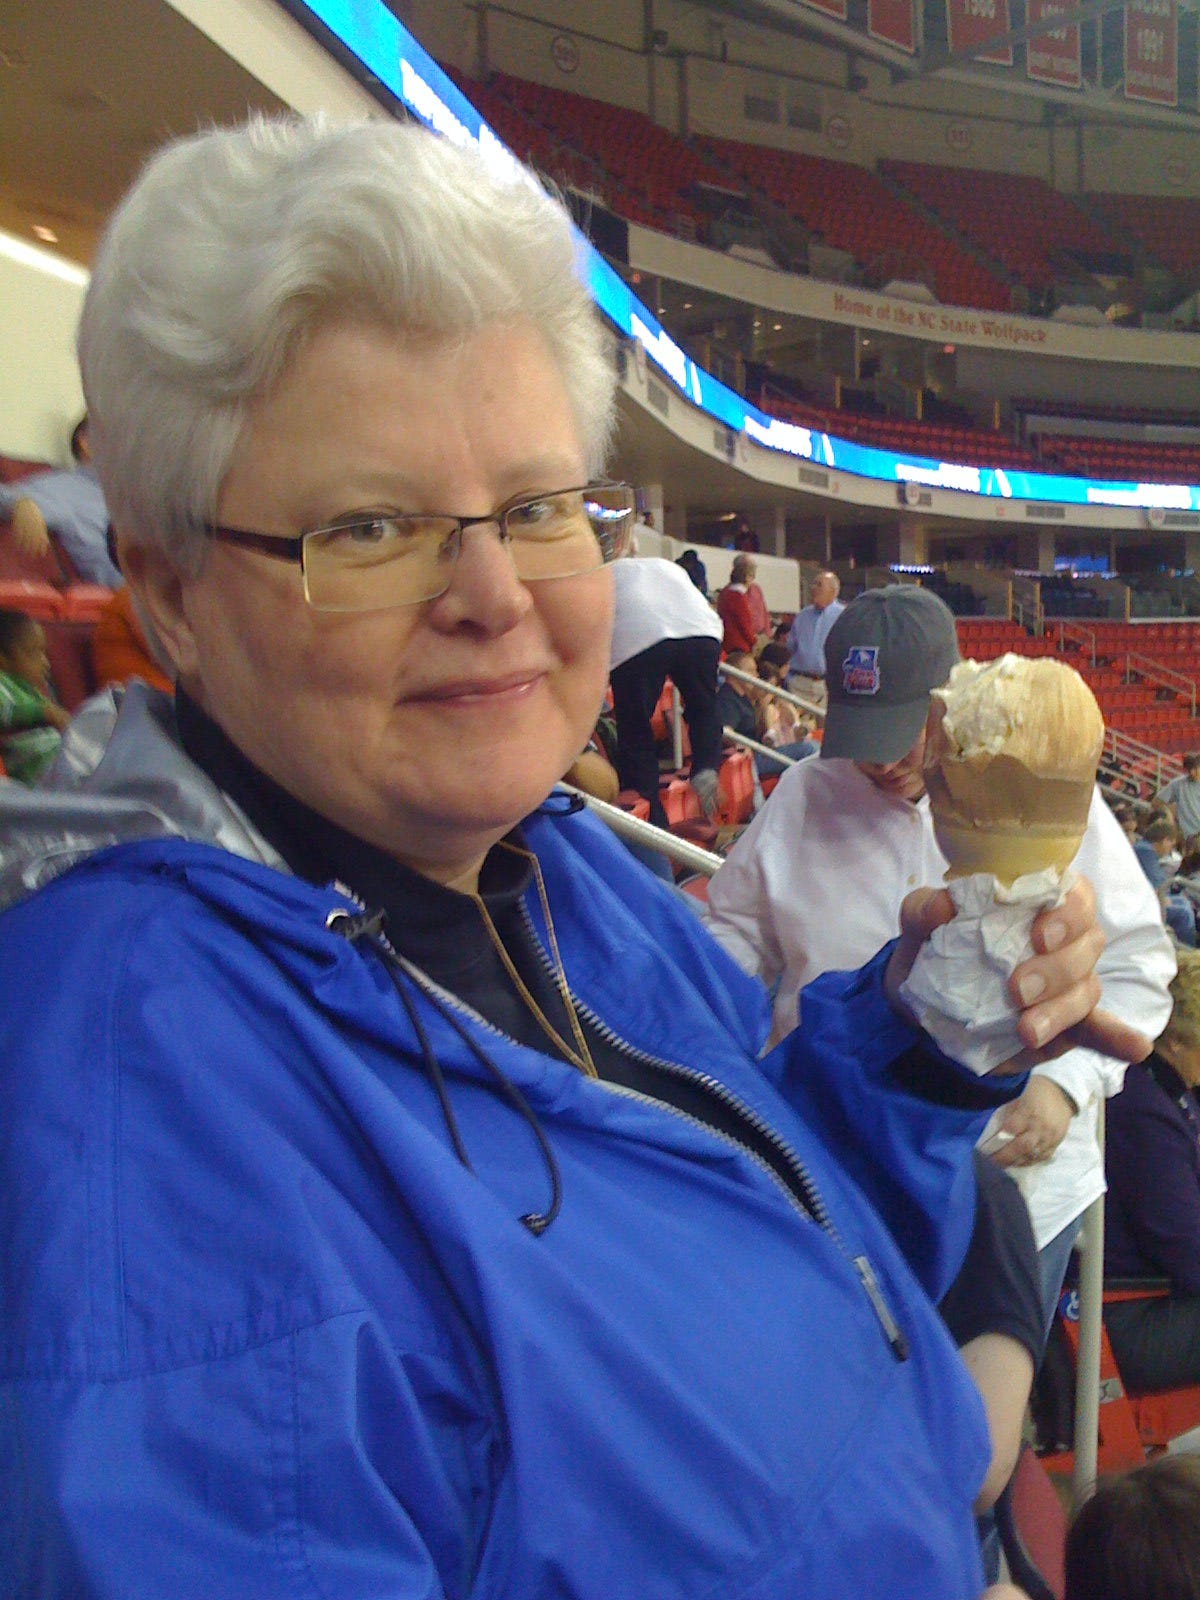 An older woman with white hair, a blue jacket, and holding an ice cream cone in a stadium